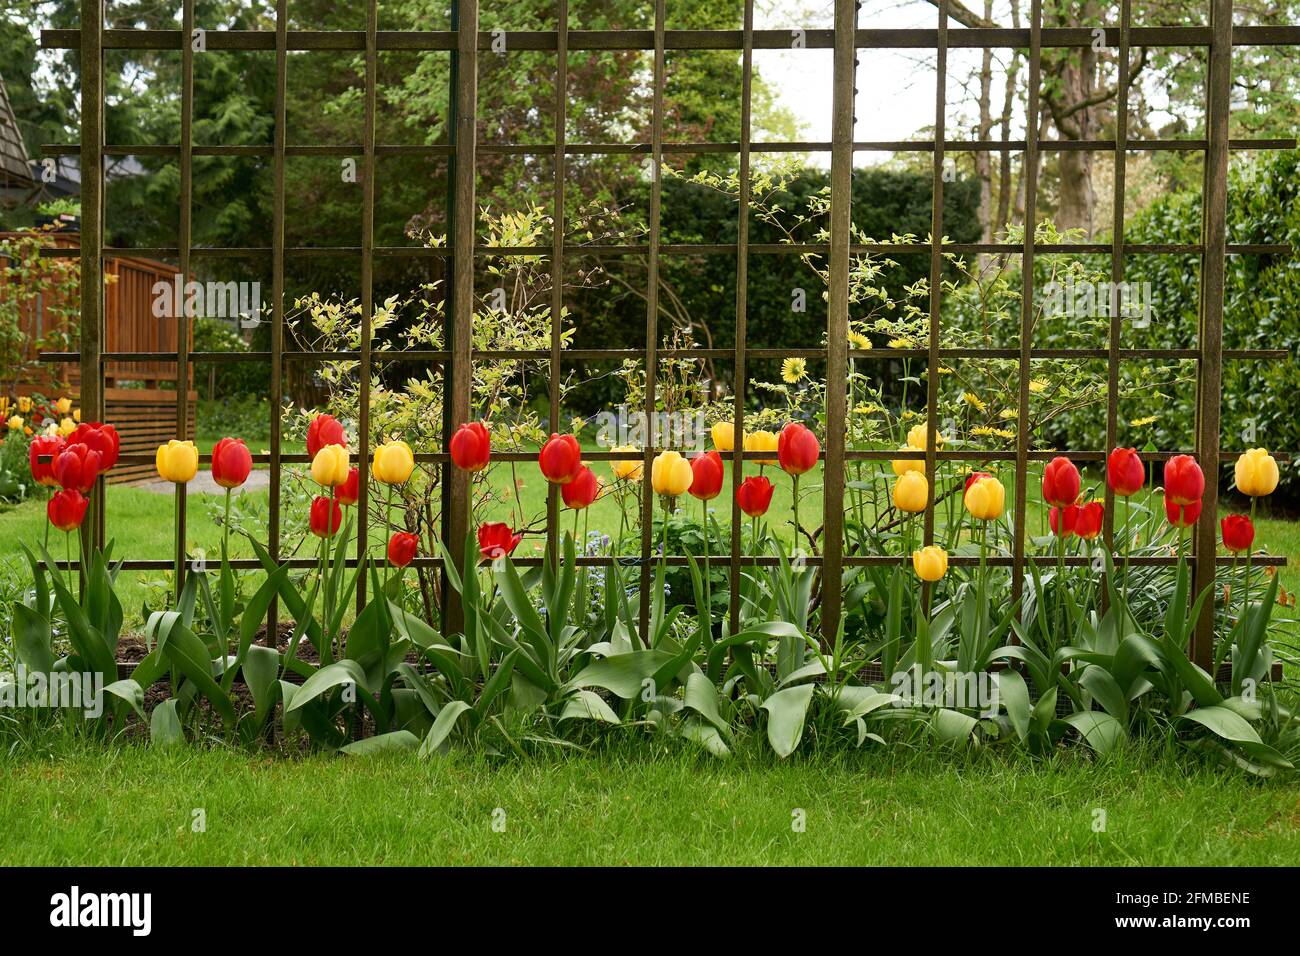 A row of red and yellow tulips blooming in a garden in spring against a wooden trellis Stock Photo